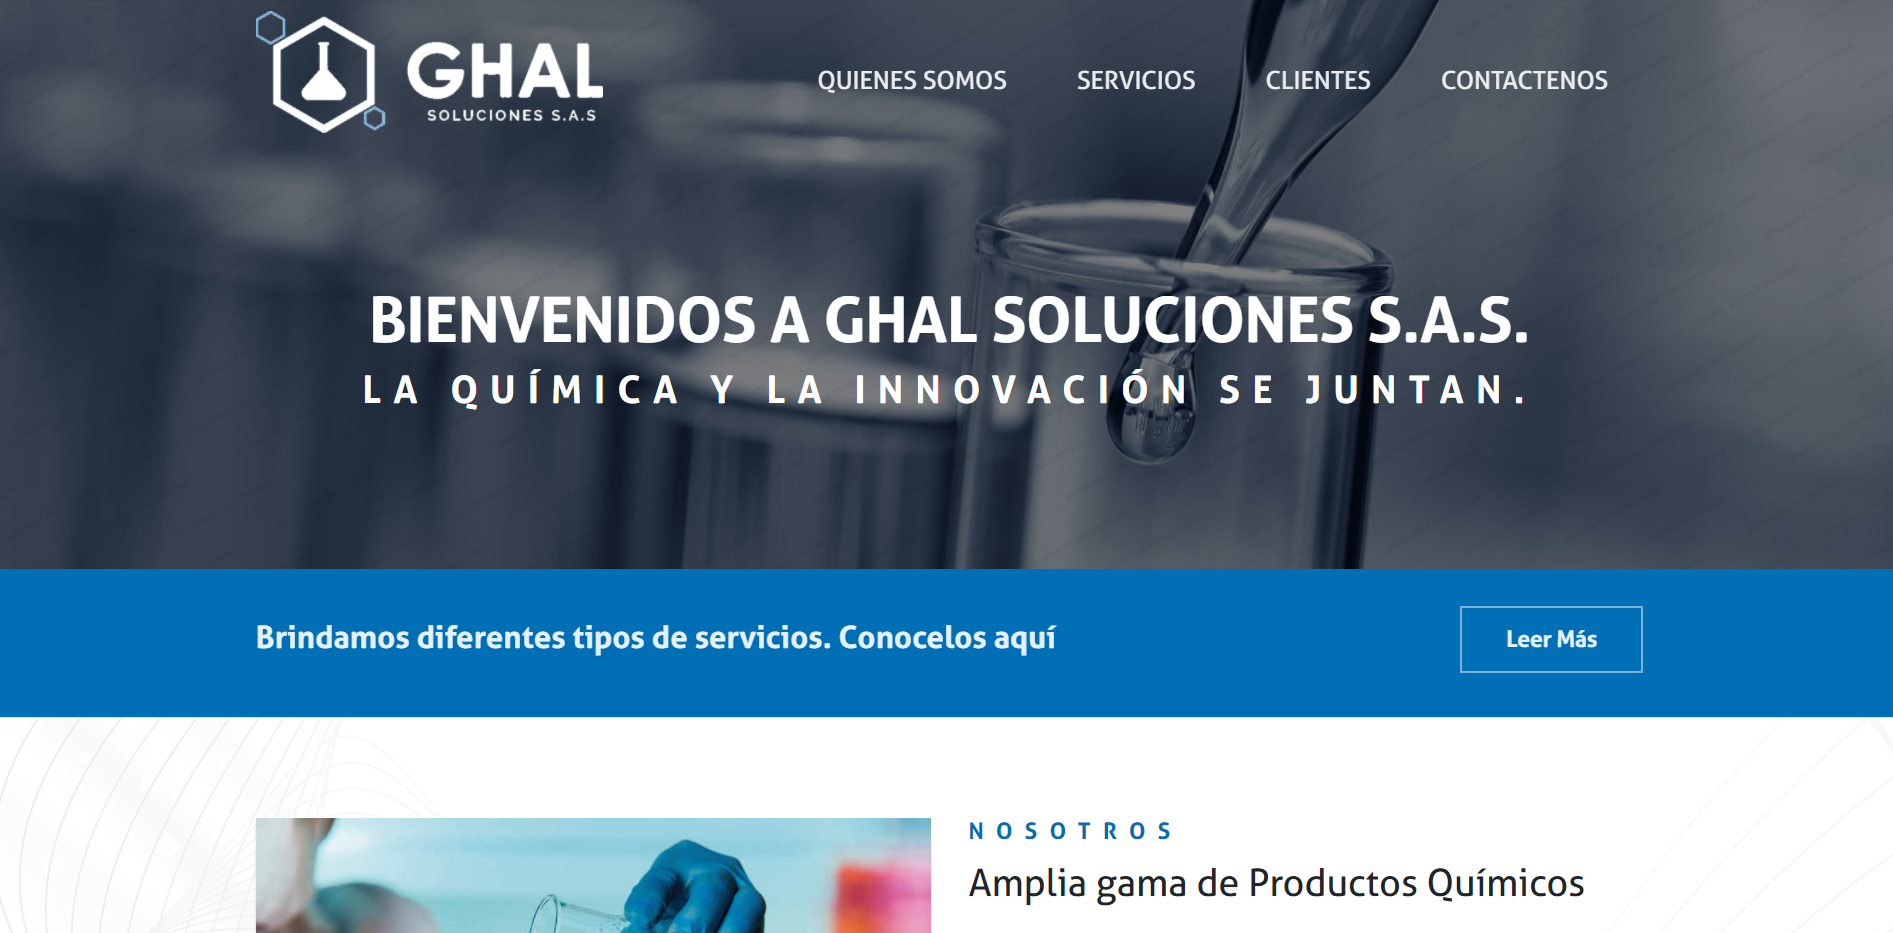 Ghal Soluciones S.A.S.